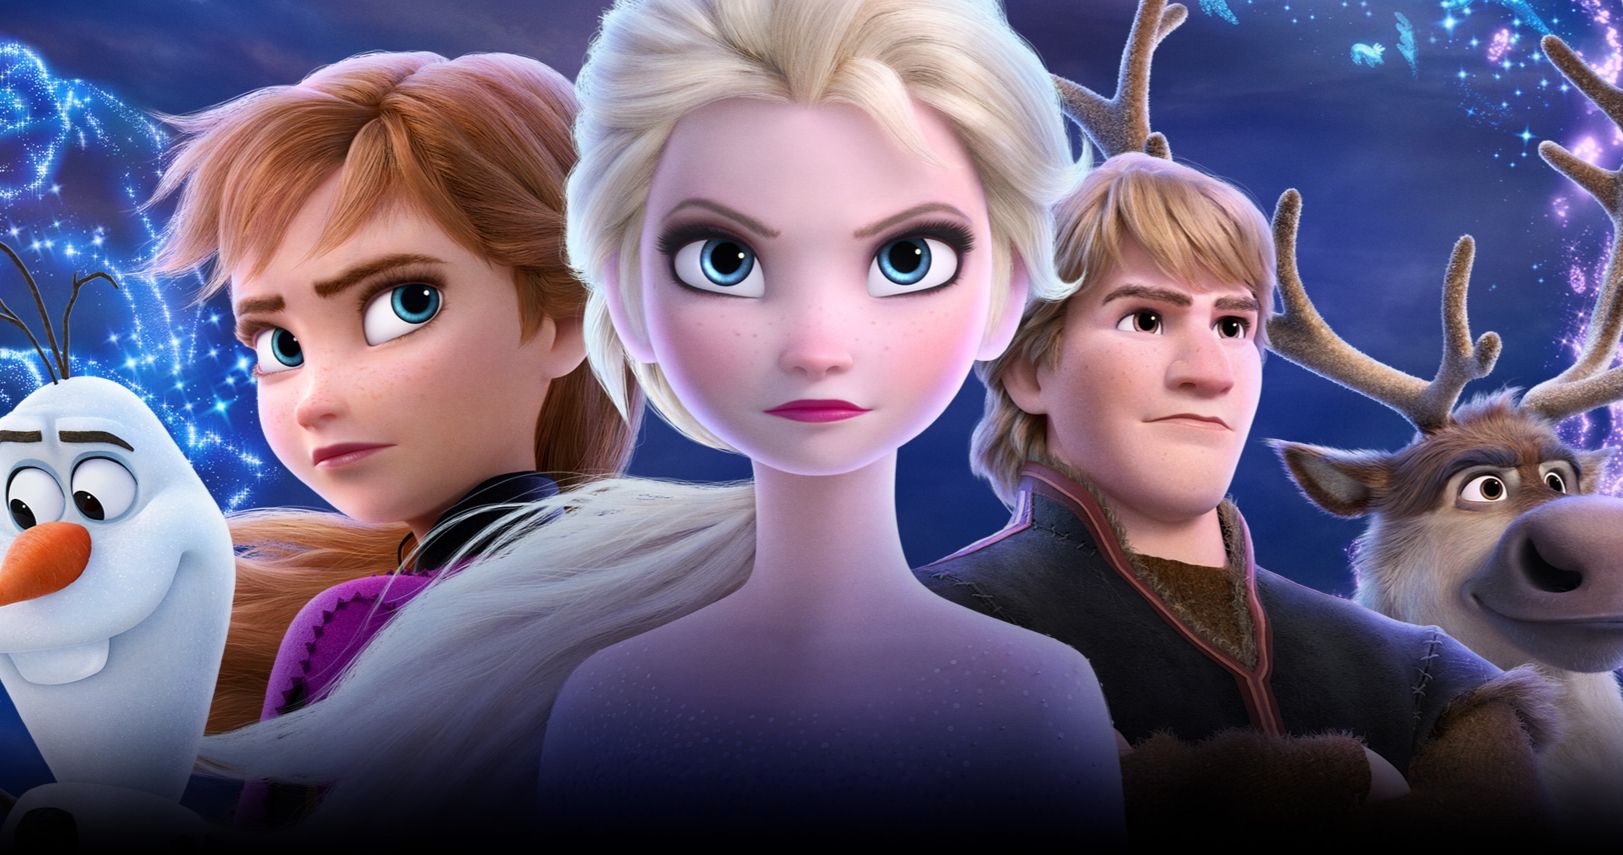 Frozen 2 Arrives on Blu-Ray with a Sing-Along Version This February